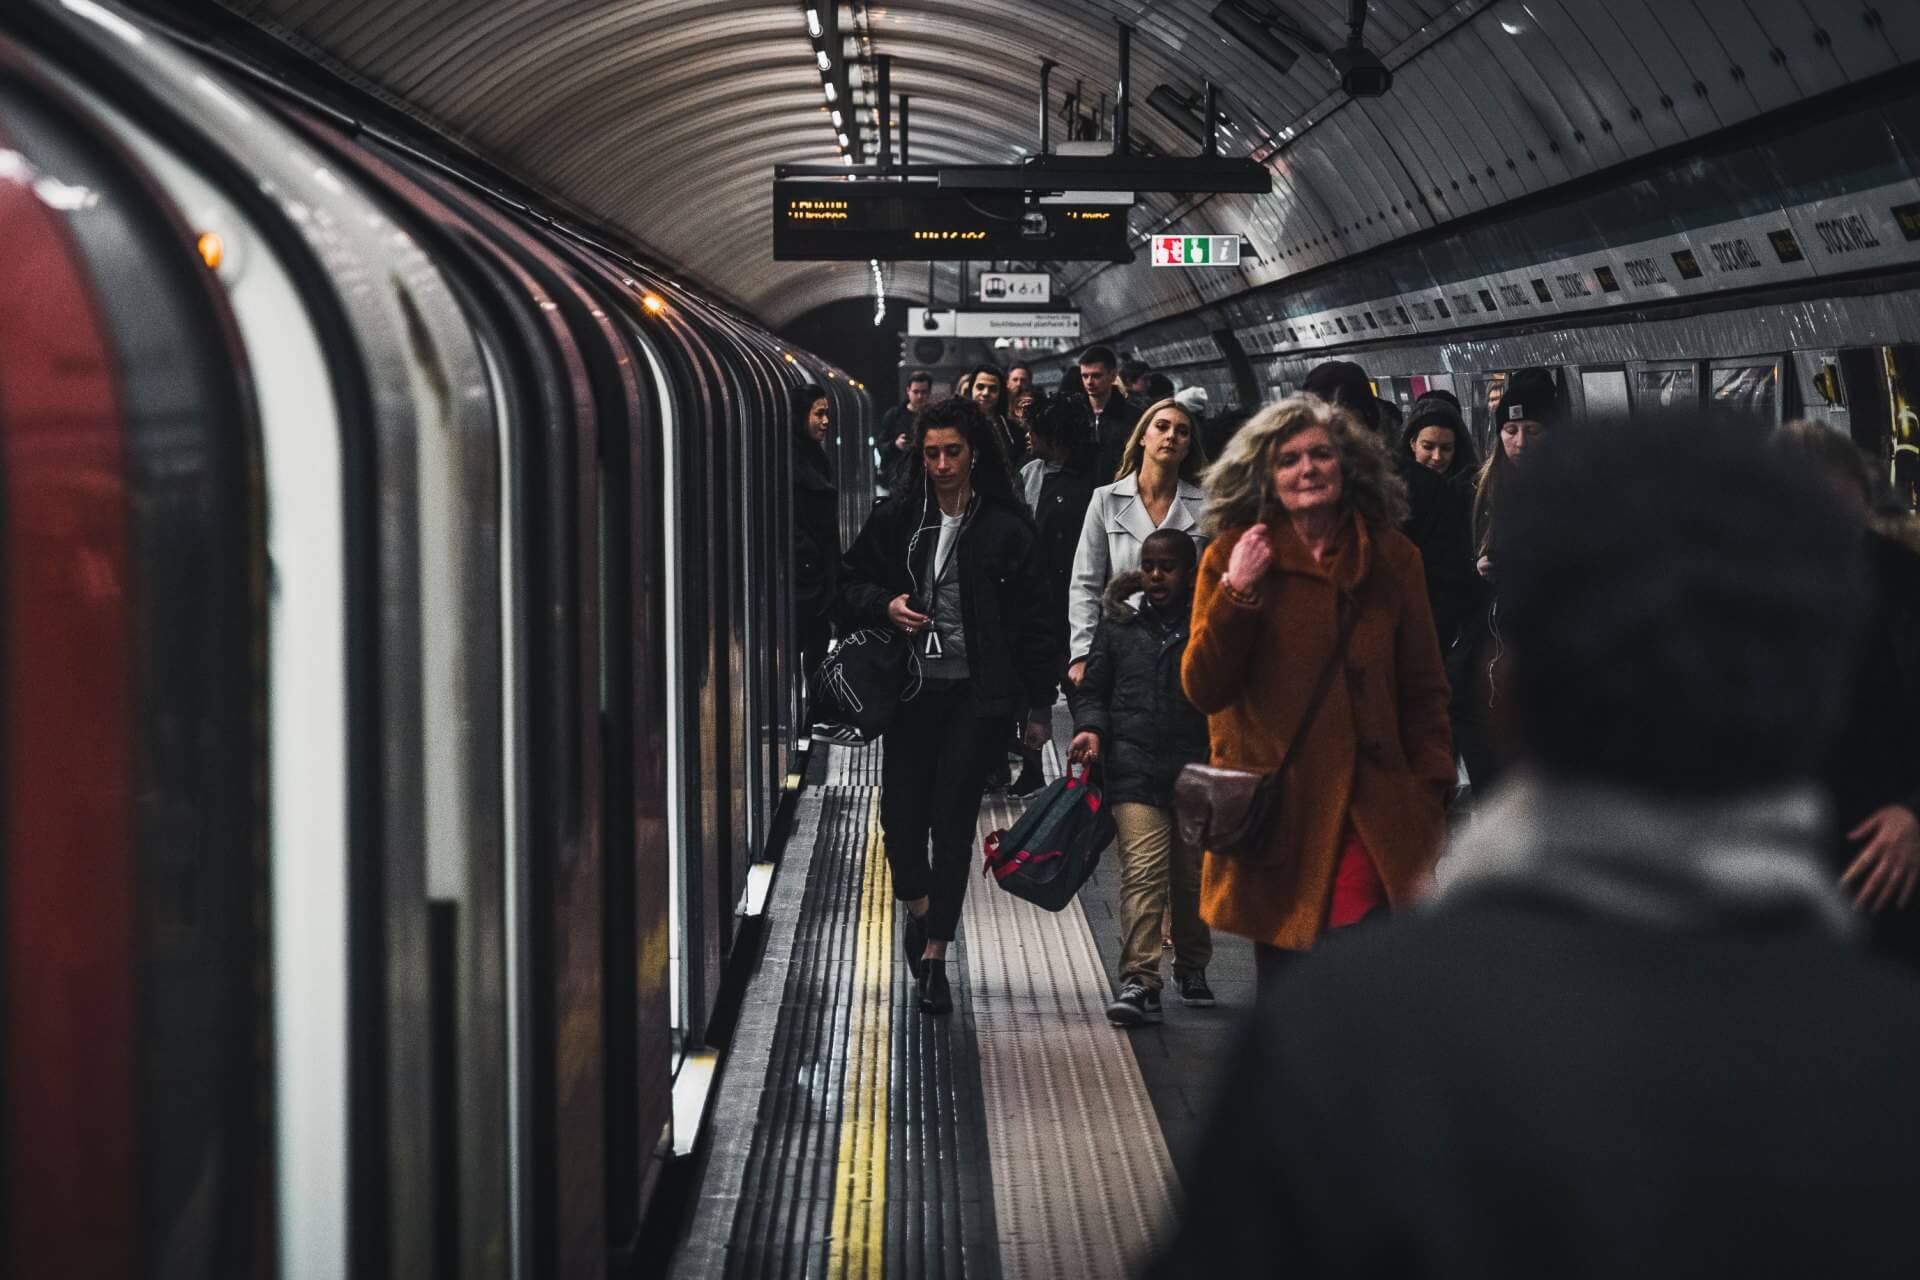 Passengers disembark a London Underground train on the Northern Line at Stockwell (Photo by Luke Stackpoole on Unsplash)